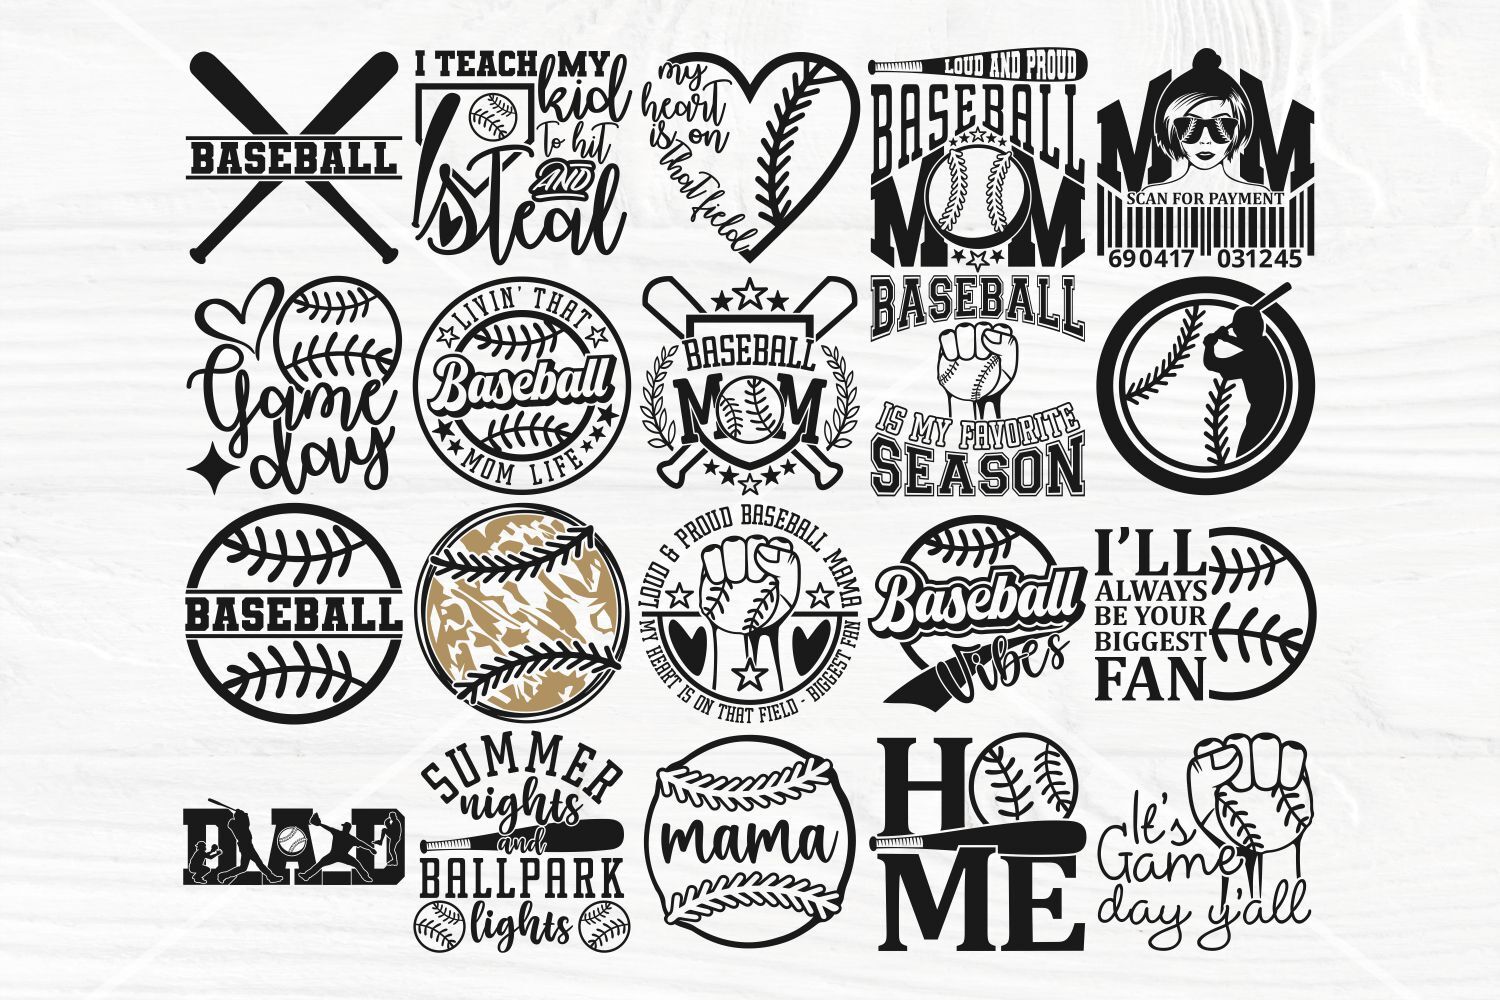 Hit and Steal Svg, Funny Baseball Shirts Svg Png, Eps Dxf Ai, Funny Baseball  Sign, Baseball Cut Files, Cricut, Silhouette, Game Day Shirts - So Fontsy